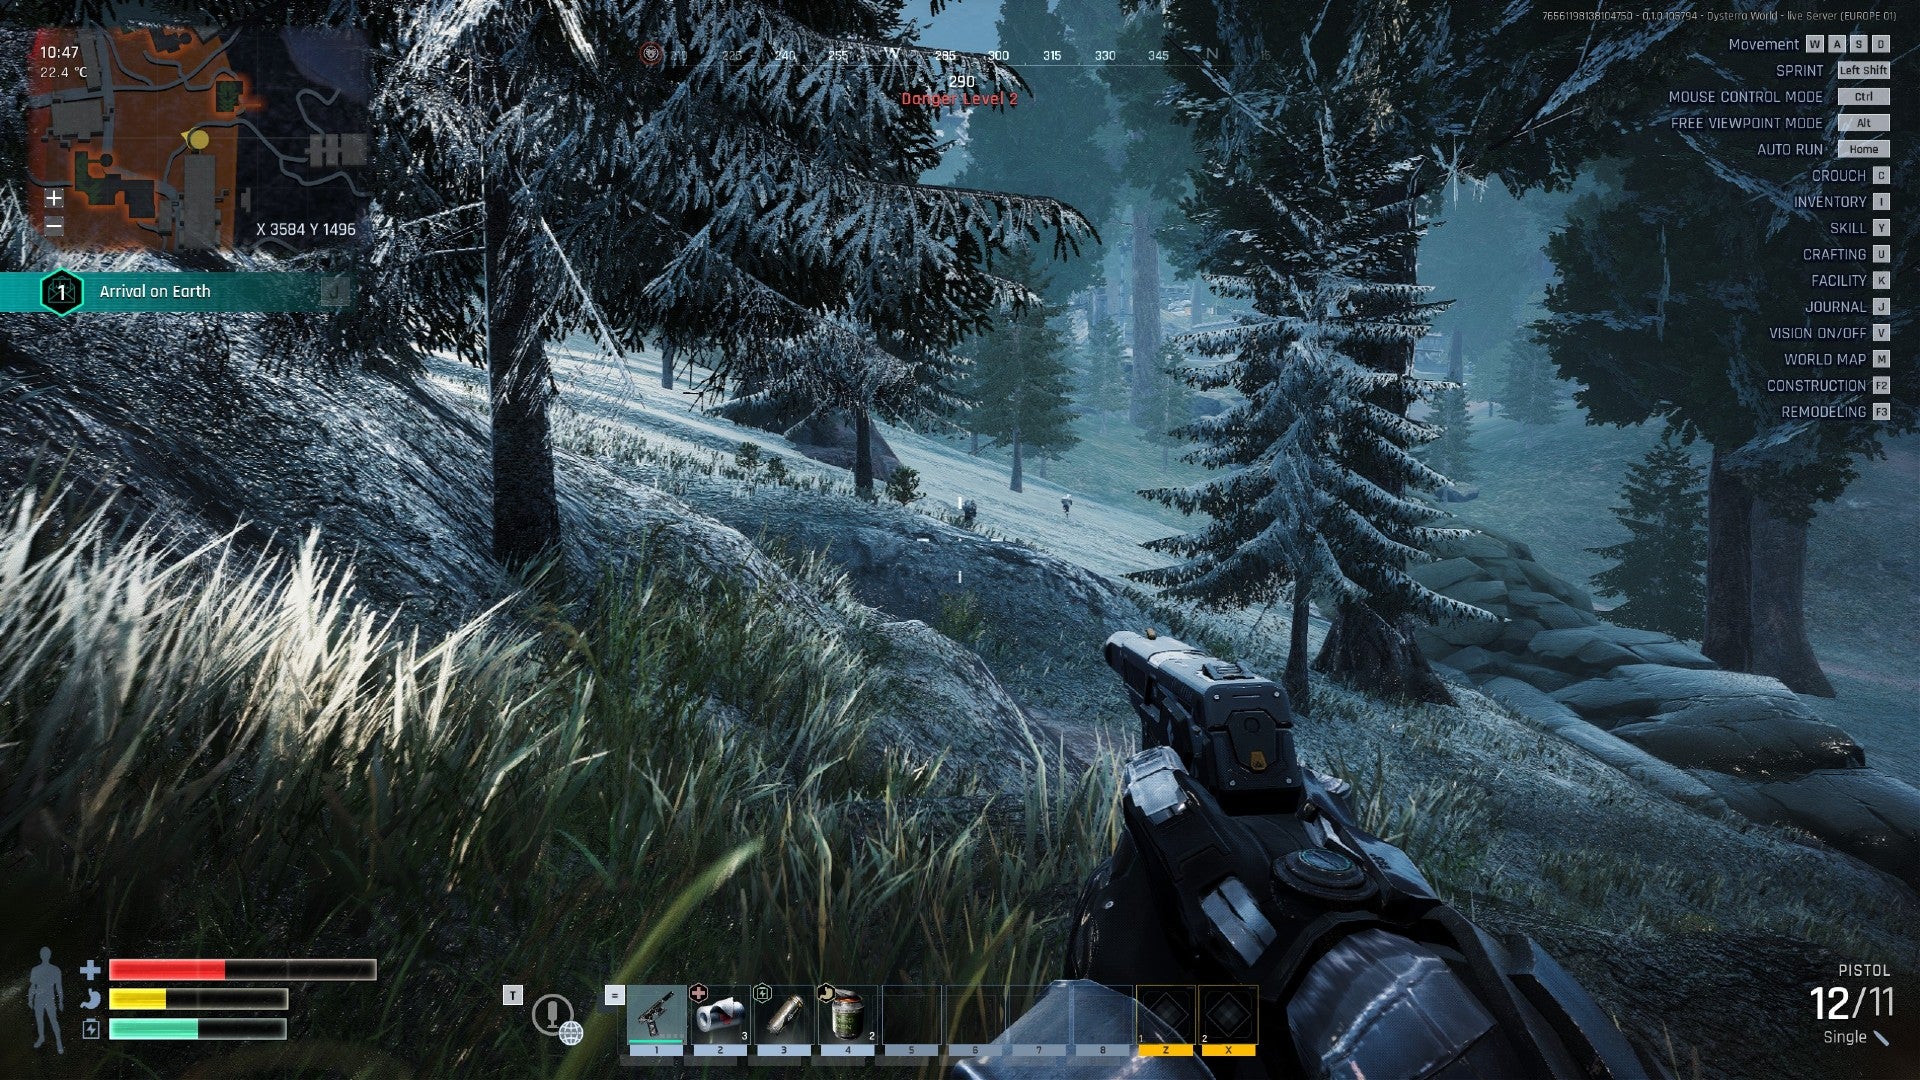 Dysterra screenshot in which I aim a pistol towards some players on the other side of a shadowy forest